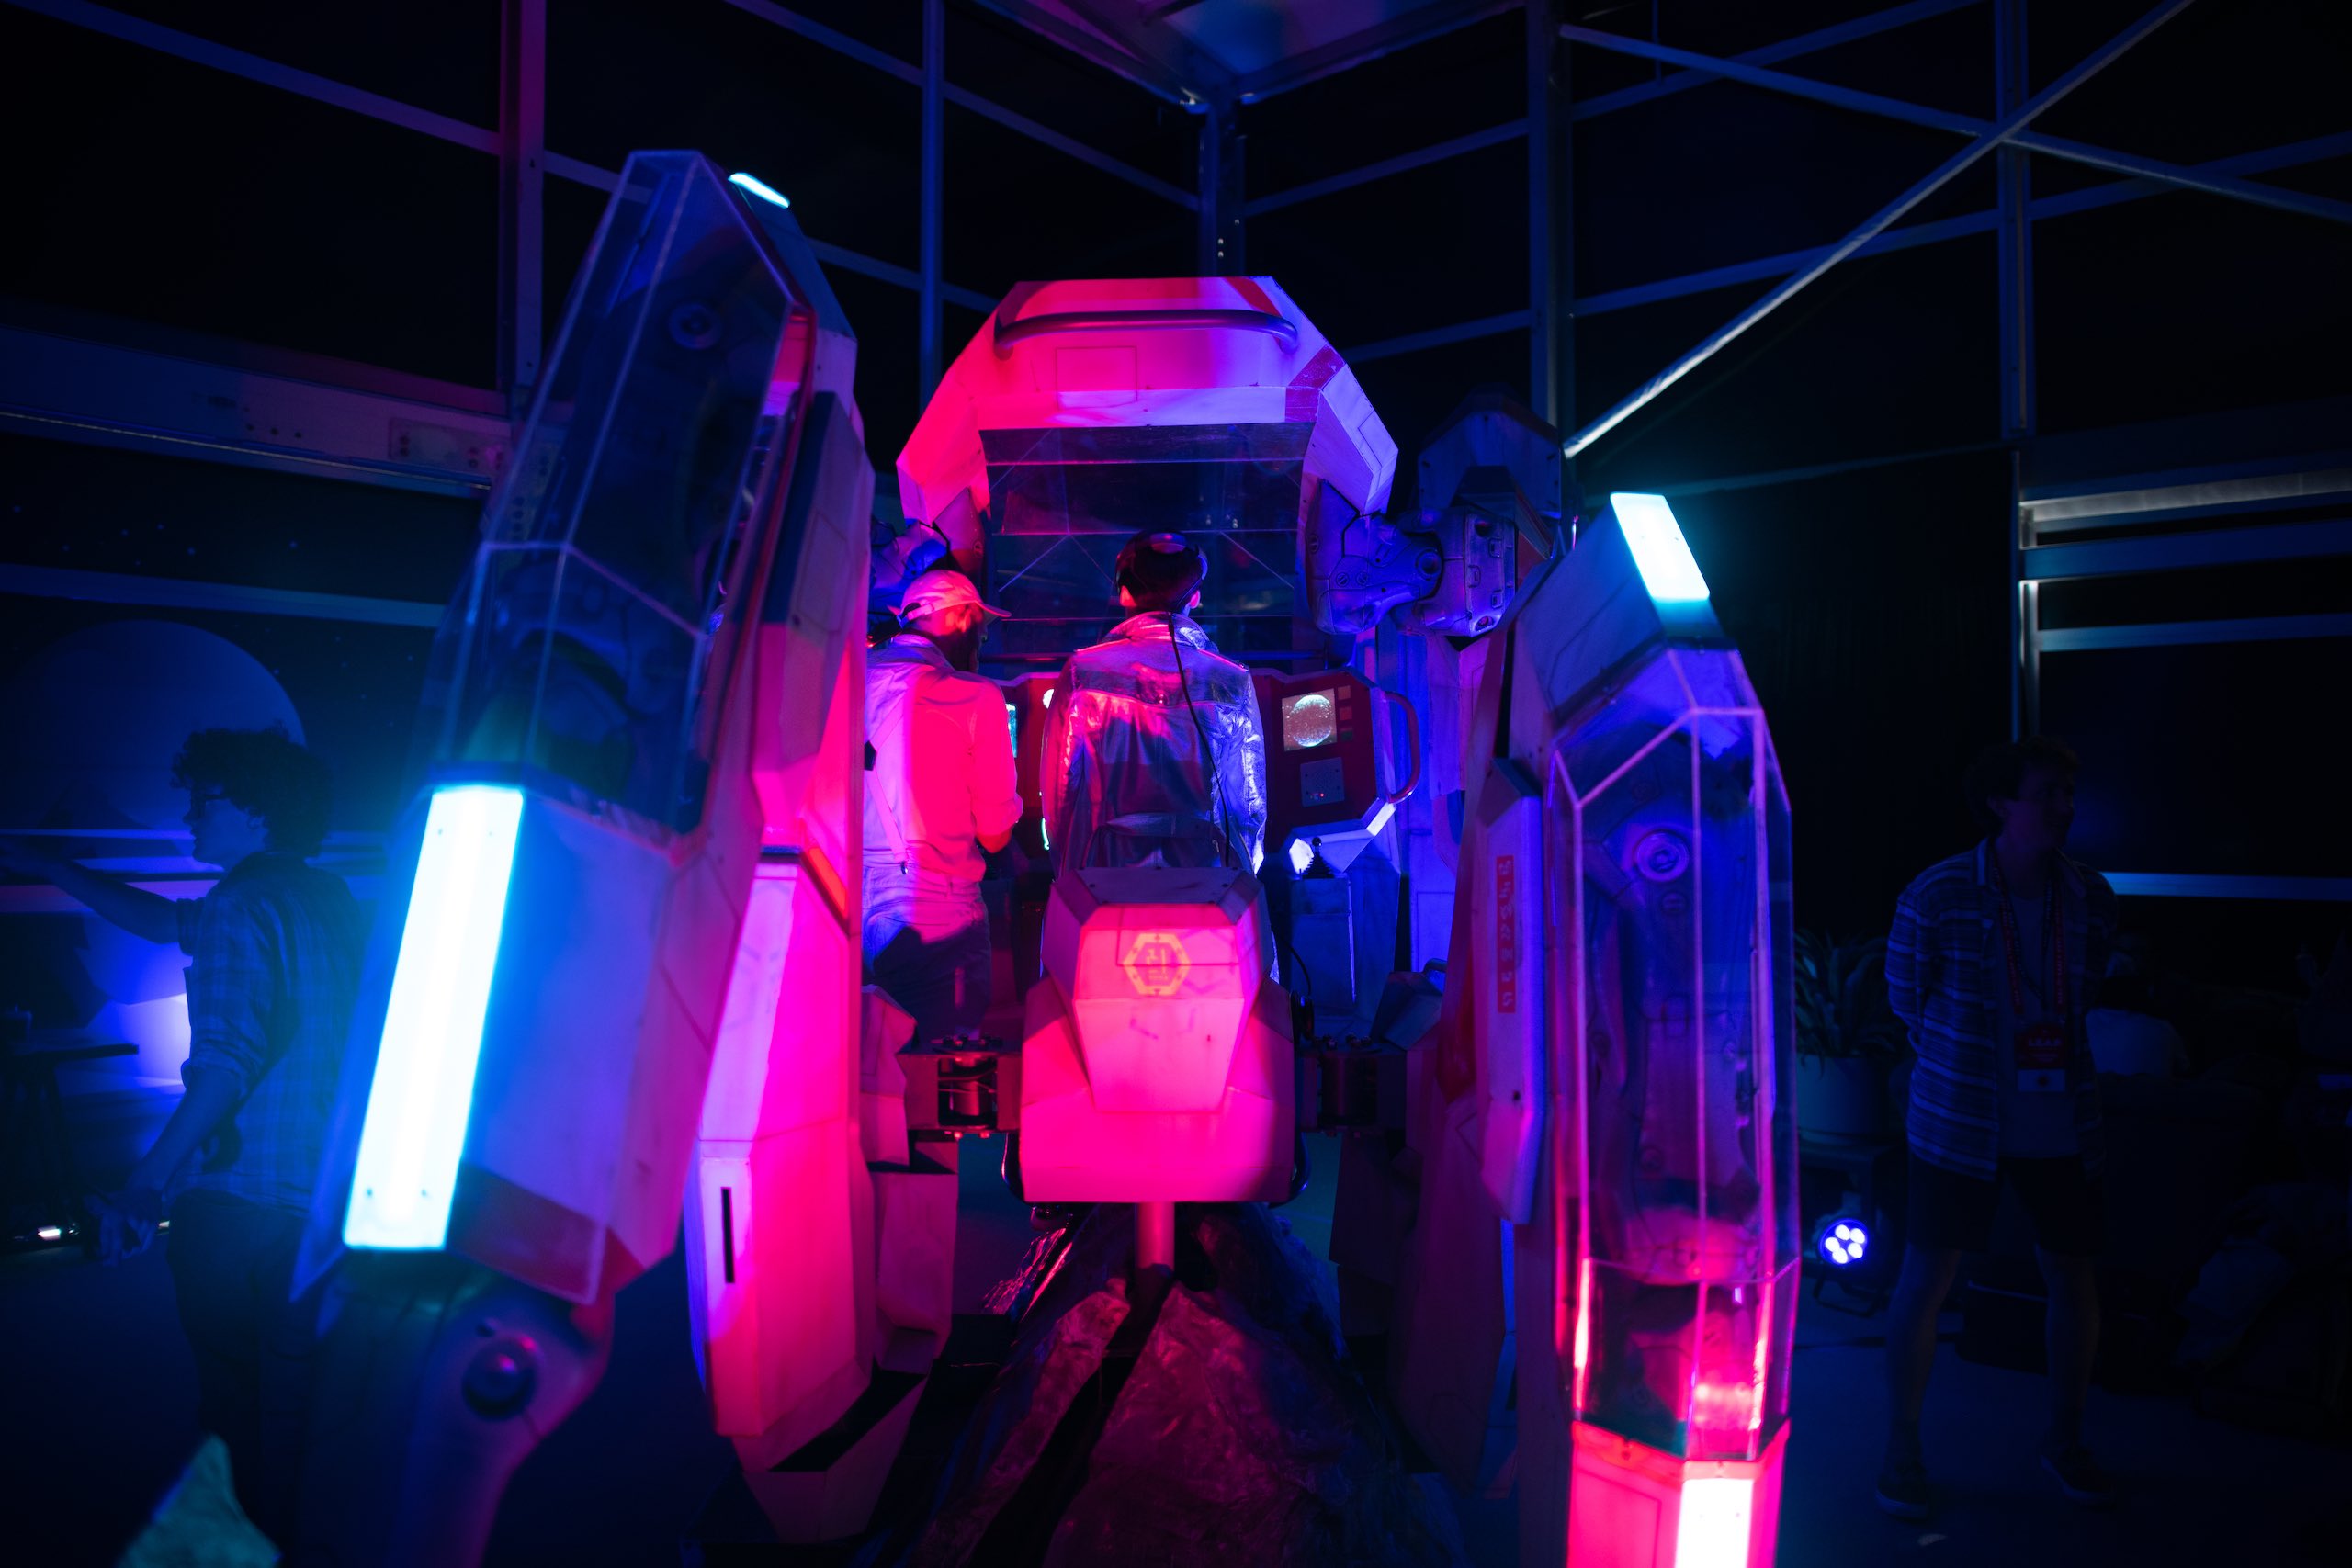 Two people in a futuristic simulator in reddish and bluish lights